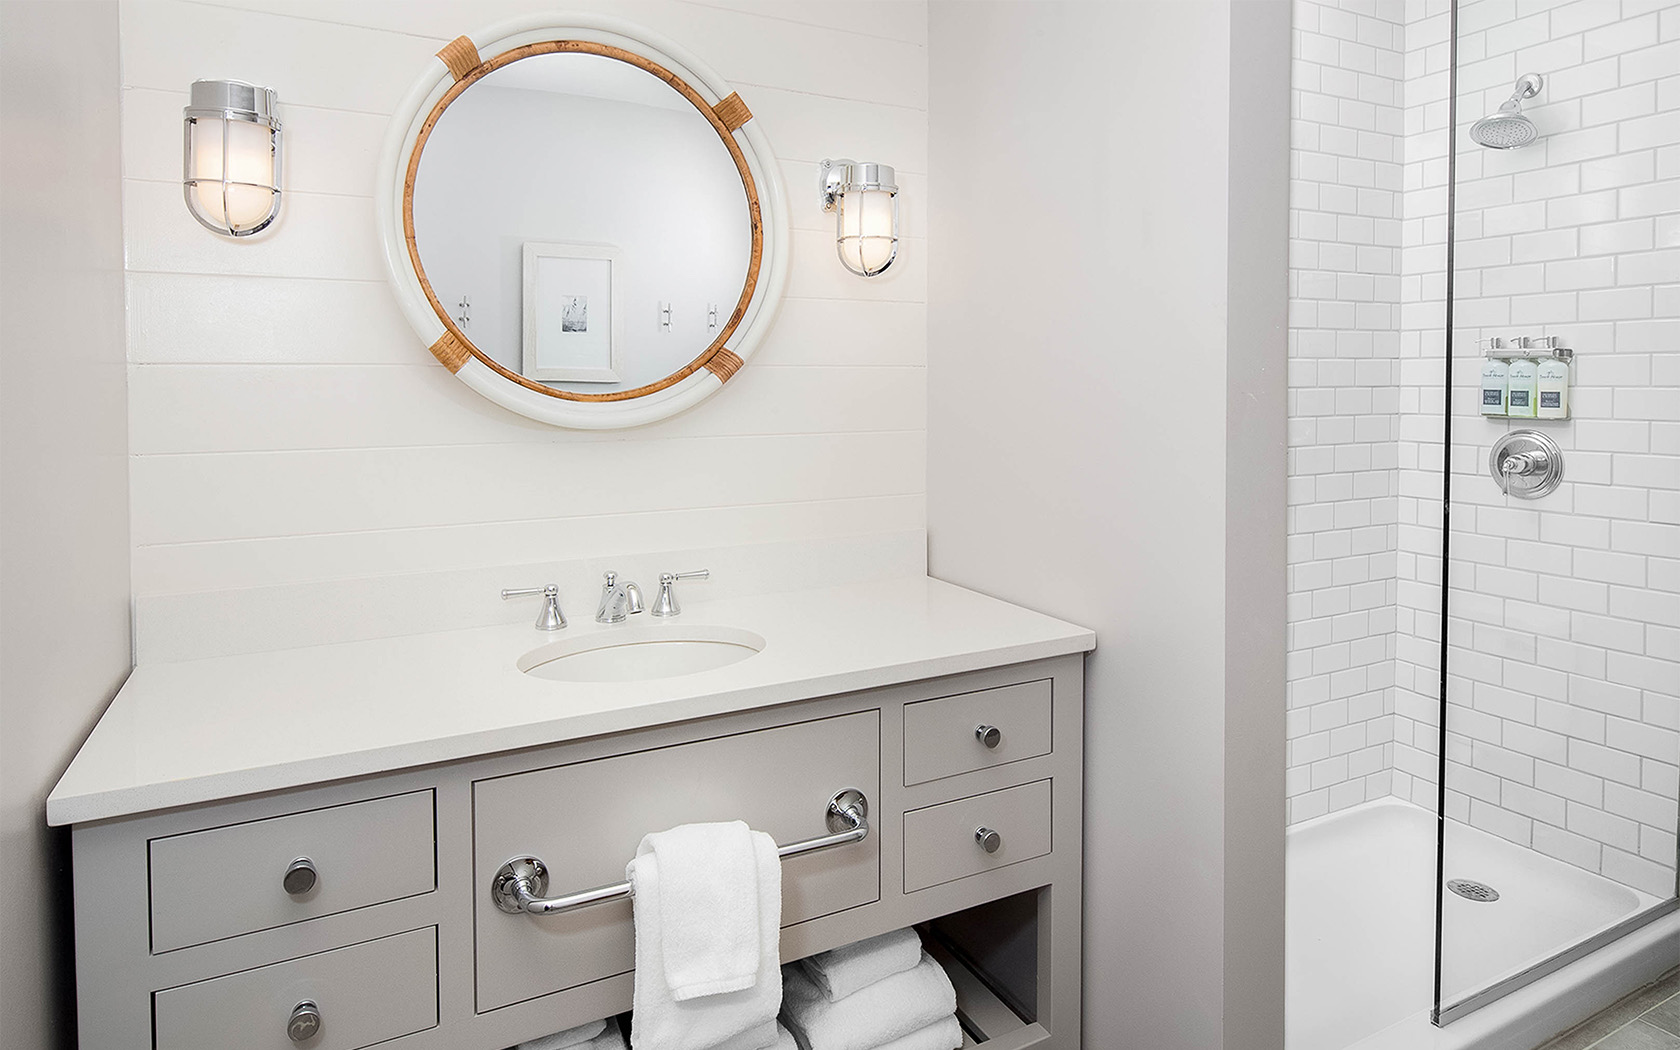 a bathroom vanity with a round mirror hanging on the wall above